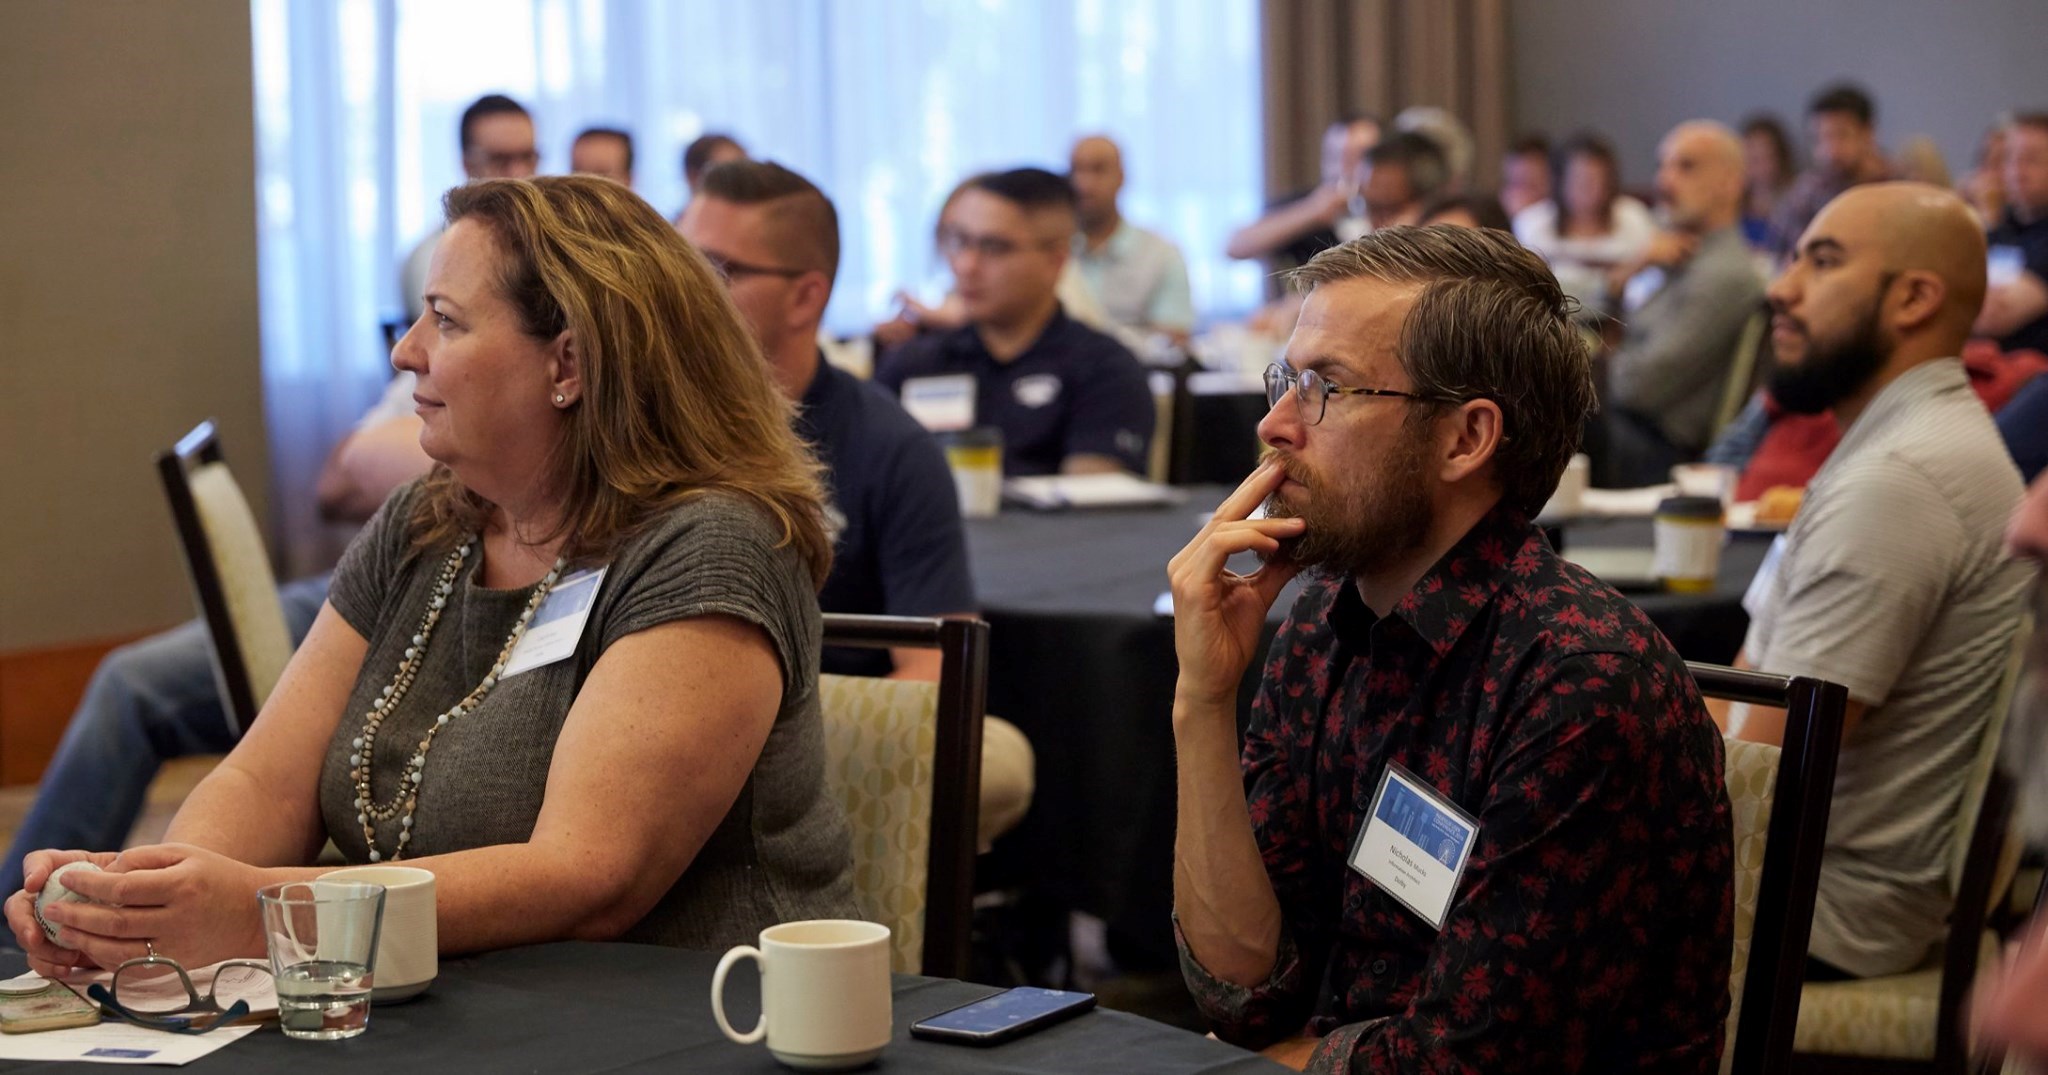 Ingeniux Blog Highlights from the 2019 Ingeniux User Conference